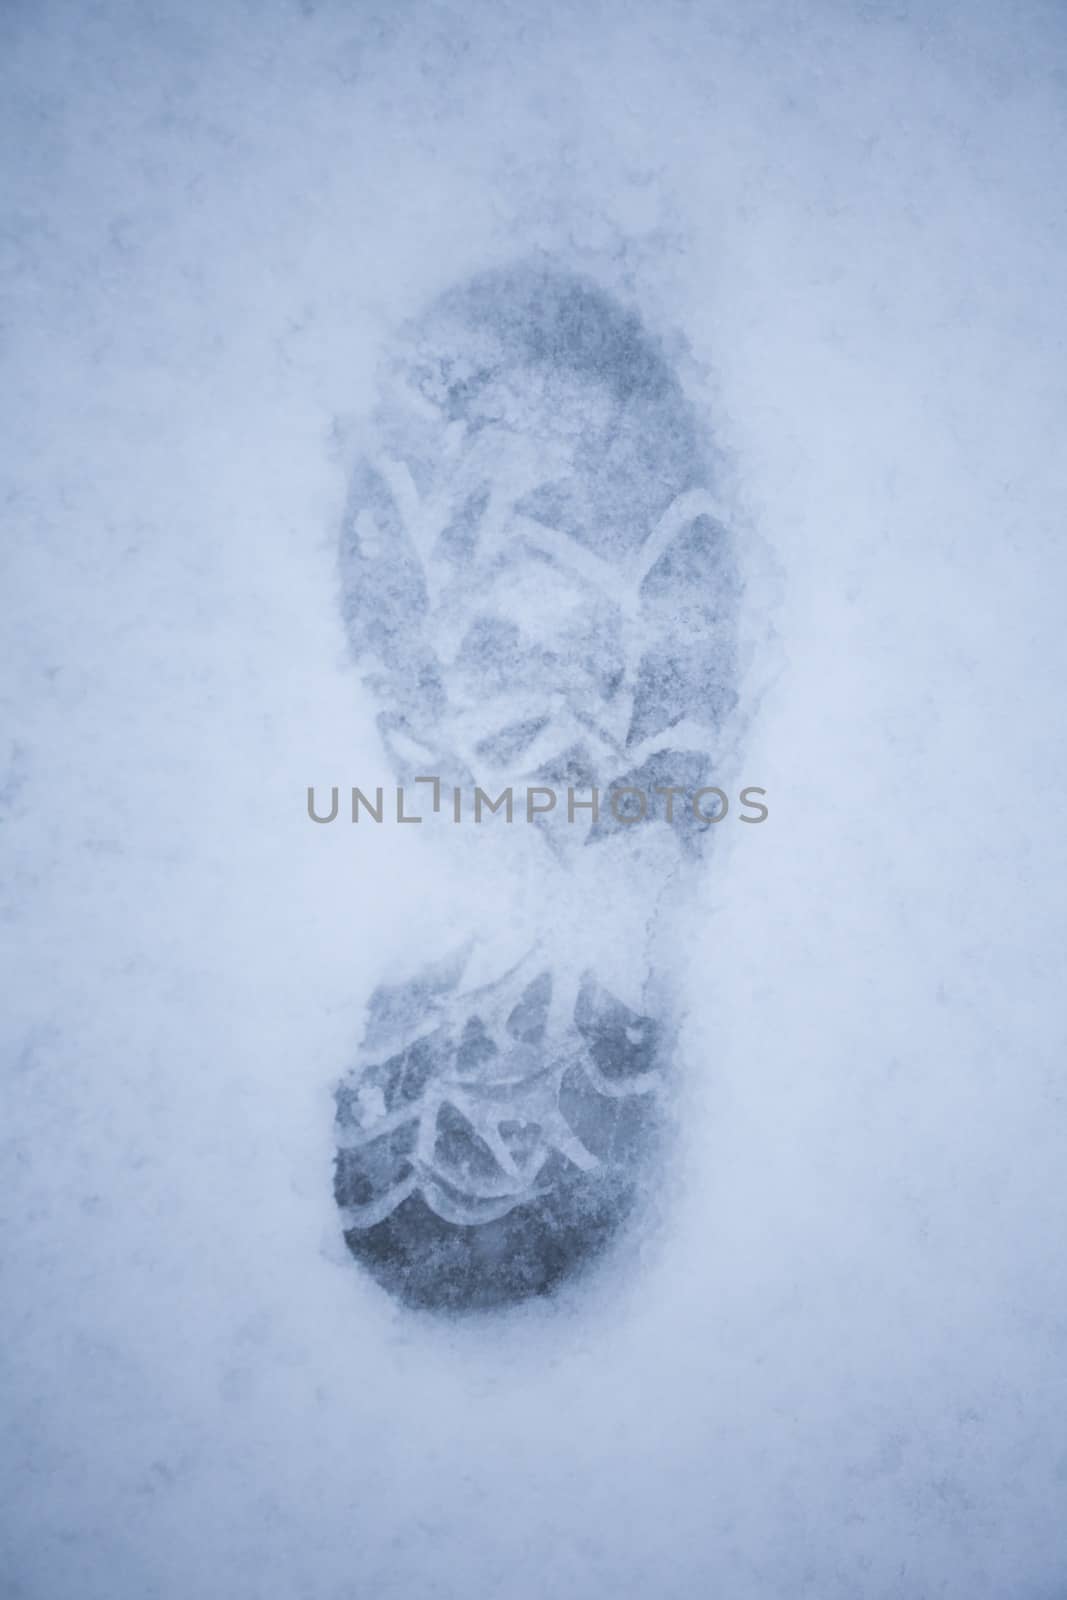 Footprint in the snow by MC2000